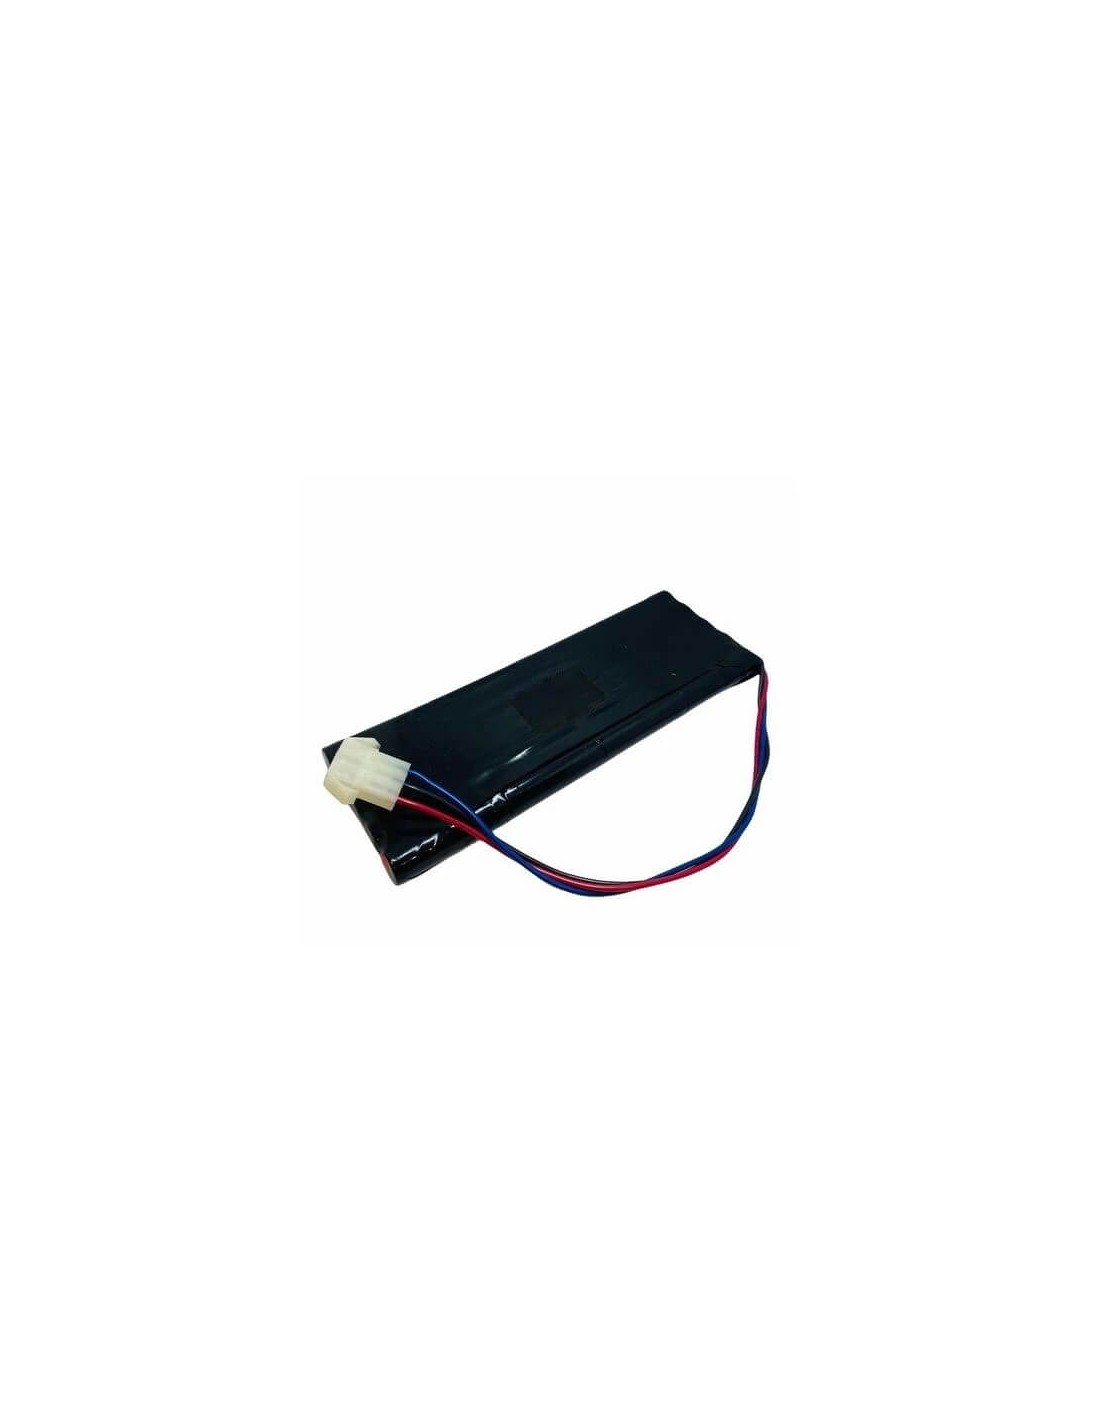 Female Pin Version Battery for Soundcast Outcast Ico 421, Ico411a, Ico410, Ico411a-4n 24.0V, 2000mAh - 48.00Wh 